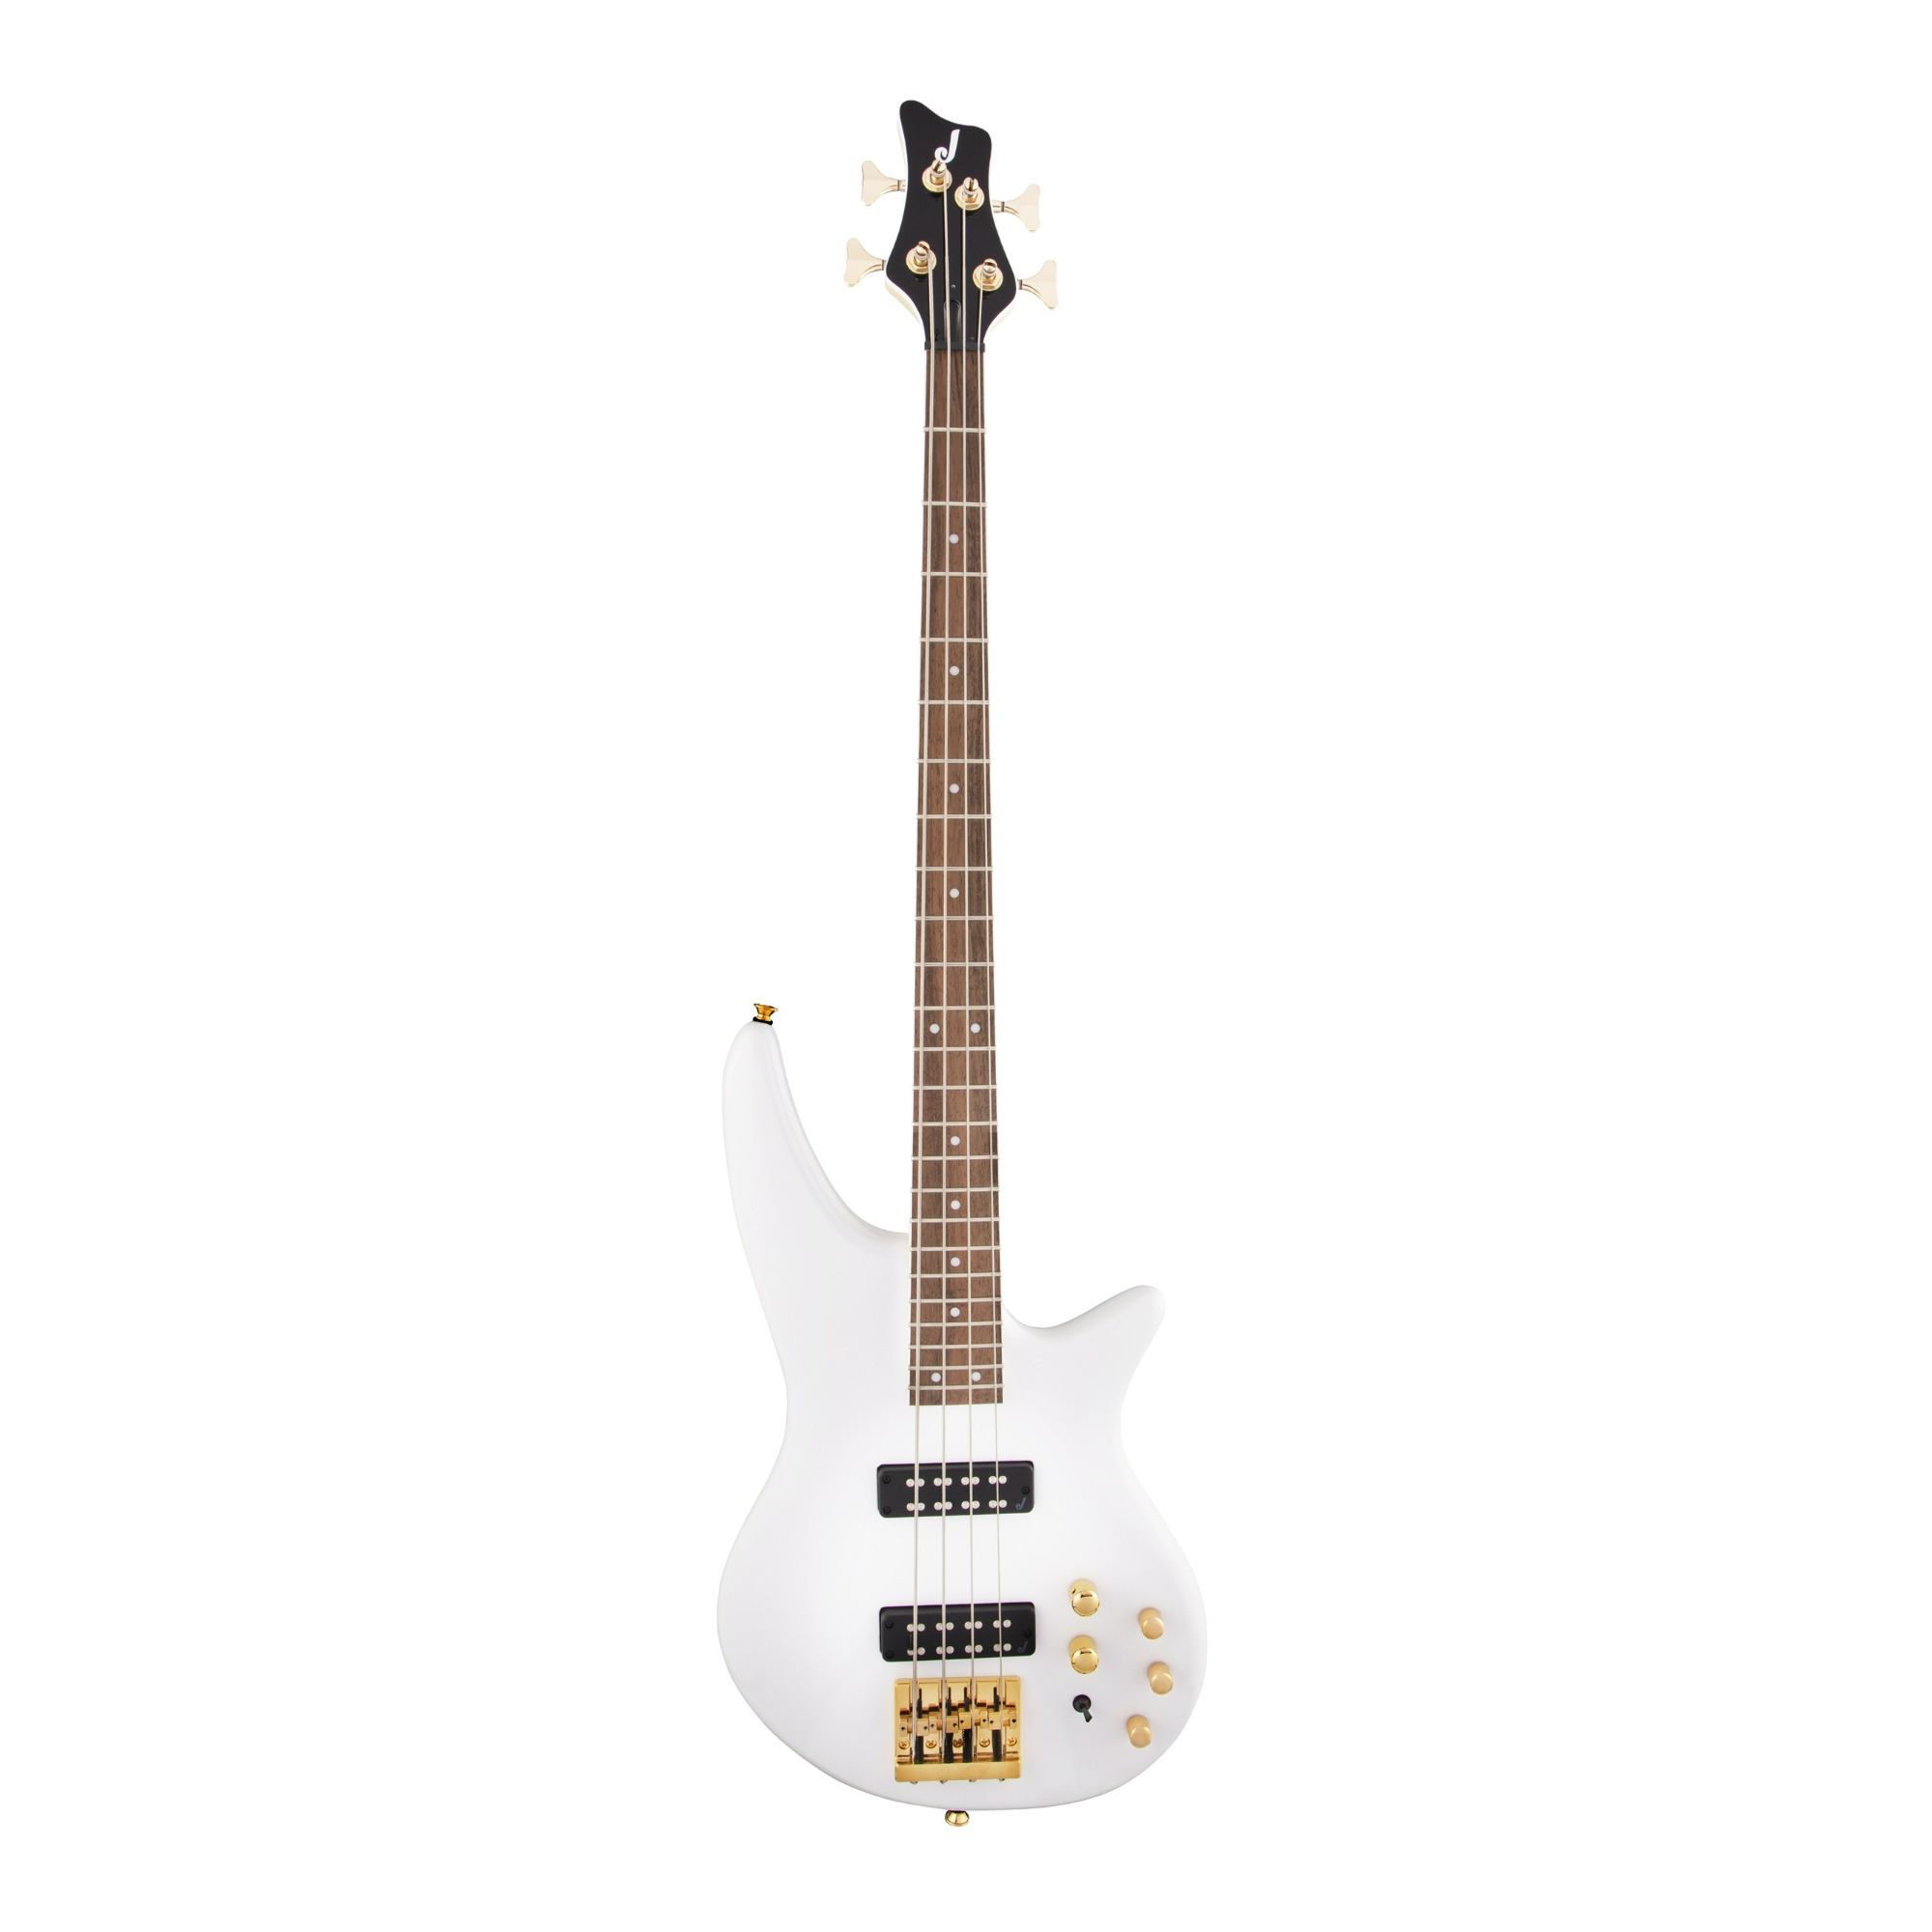 Jackson Guitars Jackson JS Series Spectra Bass JS3 4-String Electric Bass Guitar (Right-Handed, Snow White) -  2919926576